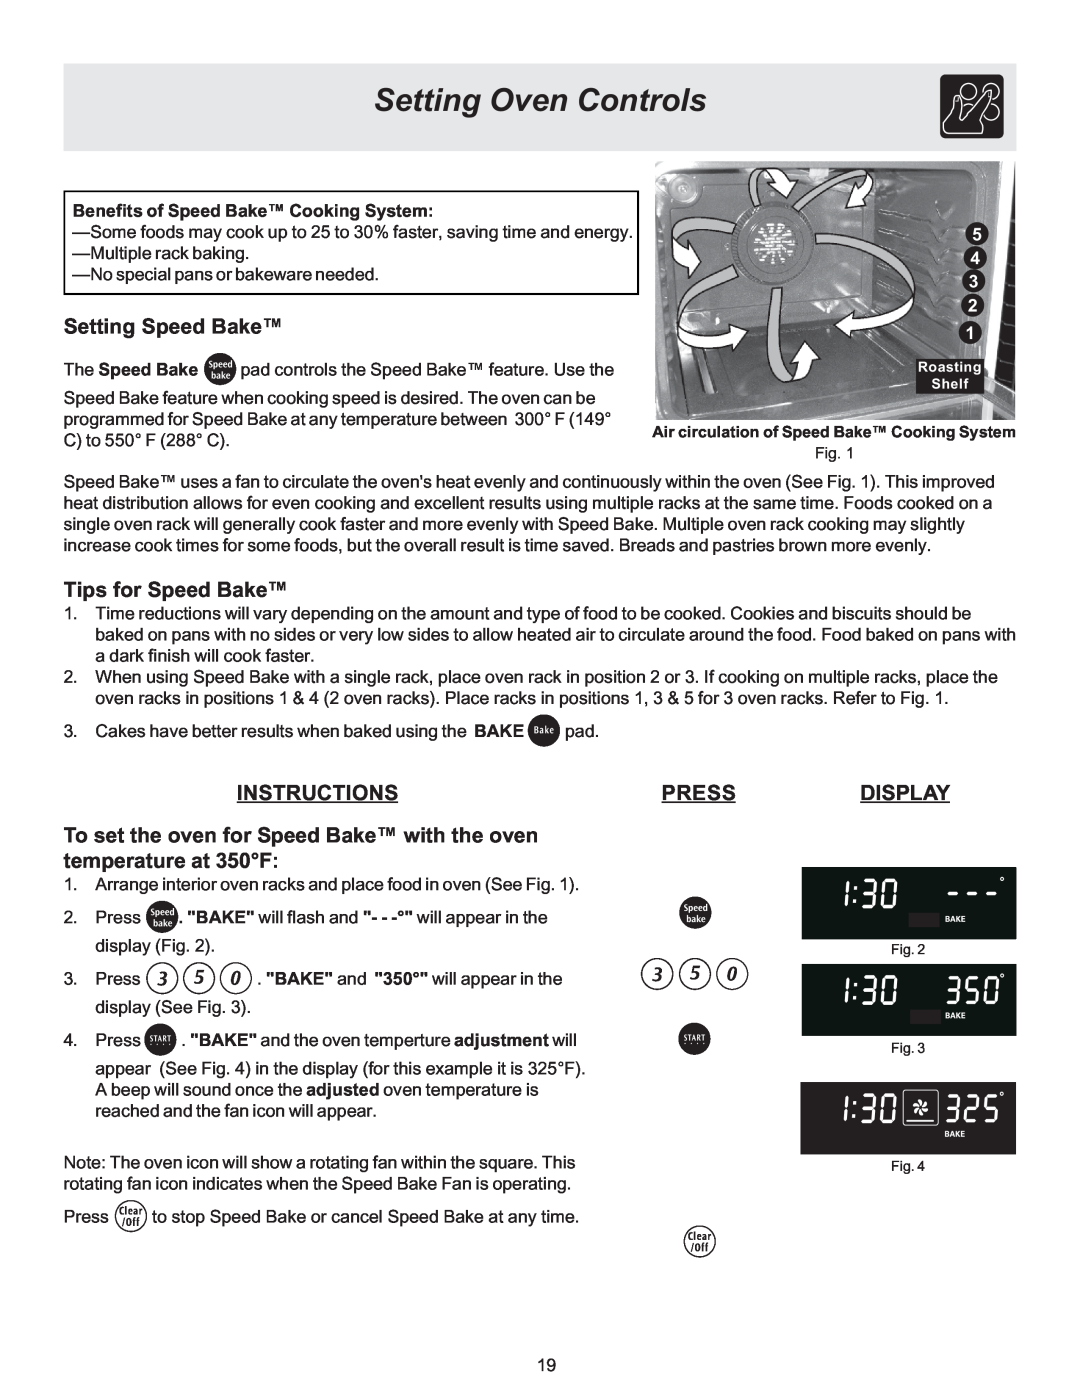 Electrolux ES510L manual Setting Speed Bake, Tips for Speed Bake, Setting Oven Controls, Instructions, Press, Display 